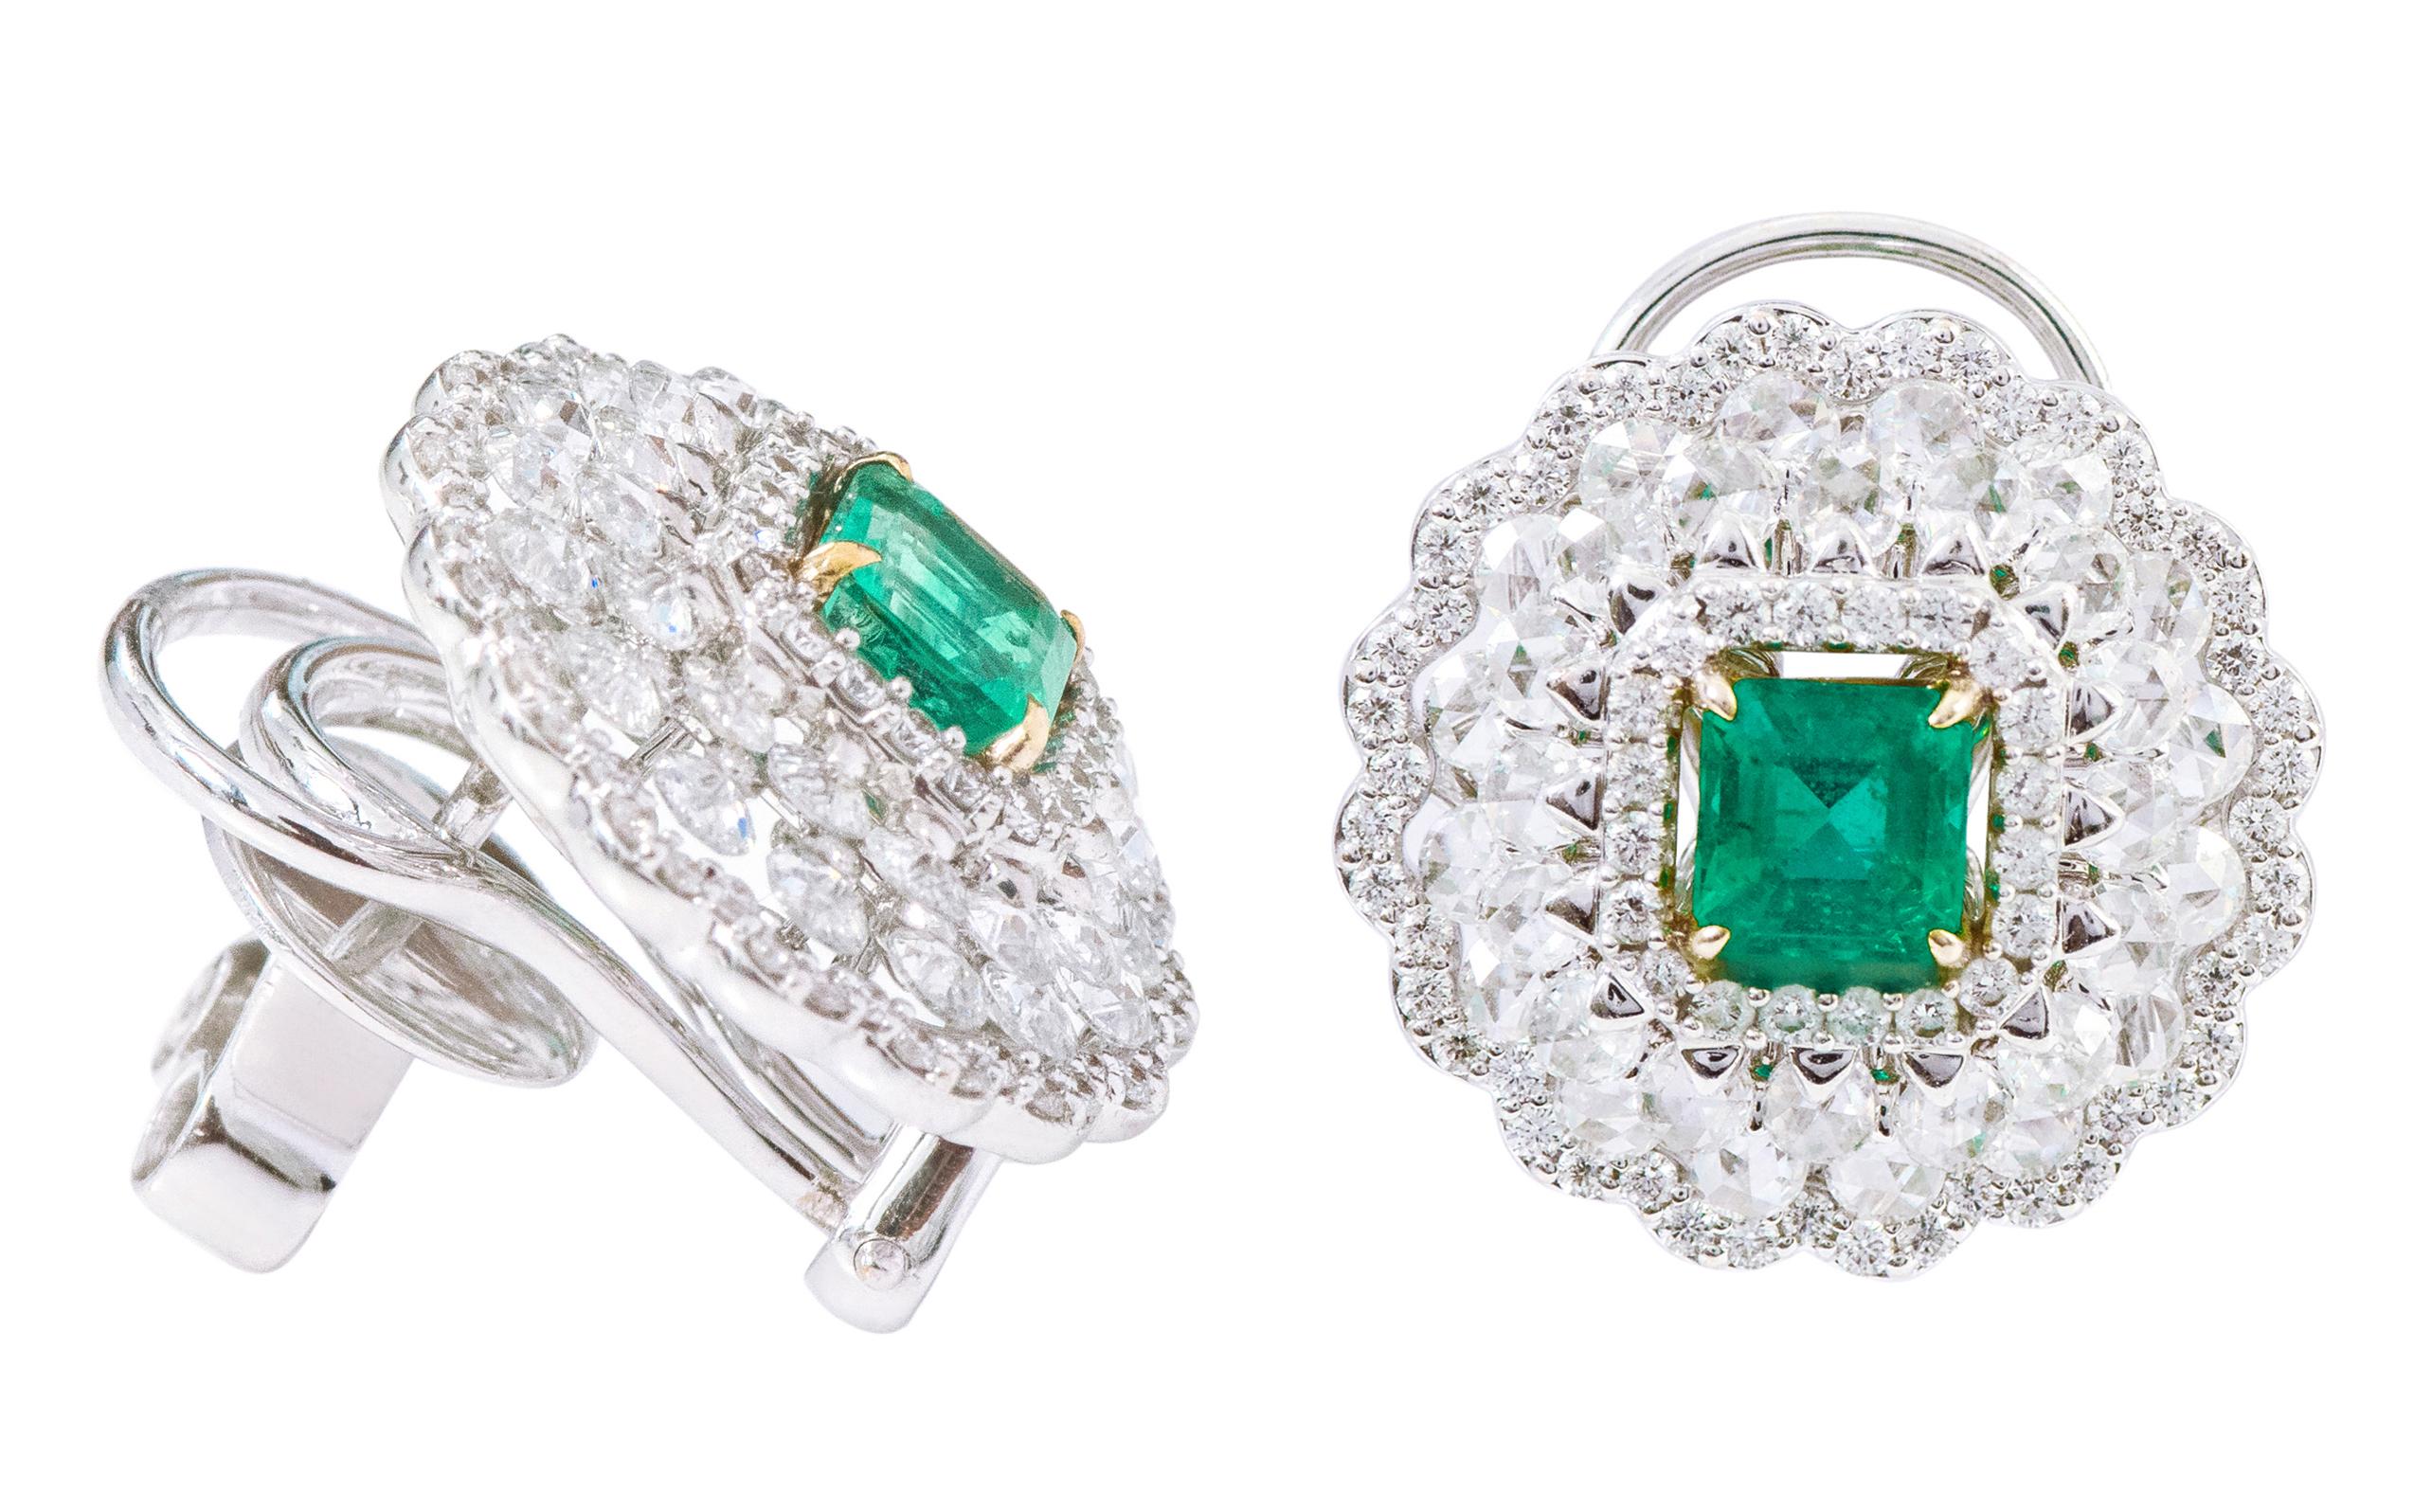 18 Karat White Gold 3.37 Carat Natural Emerald and Diamond Stud Earrings

This magnificent vivid green emerald and diamond rose-cut earring is fascinating. The earring sets itself apart with the exquisite solitaire emerald cut emerald surrounded by